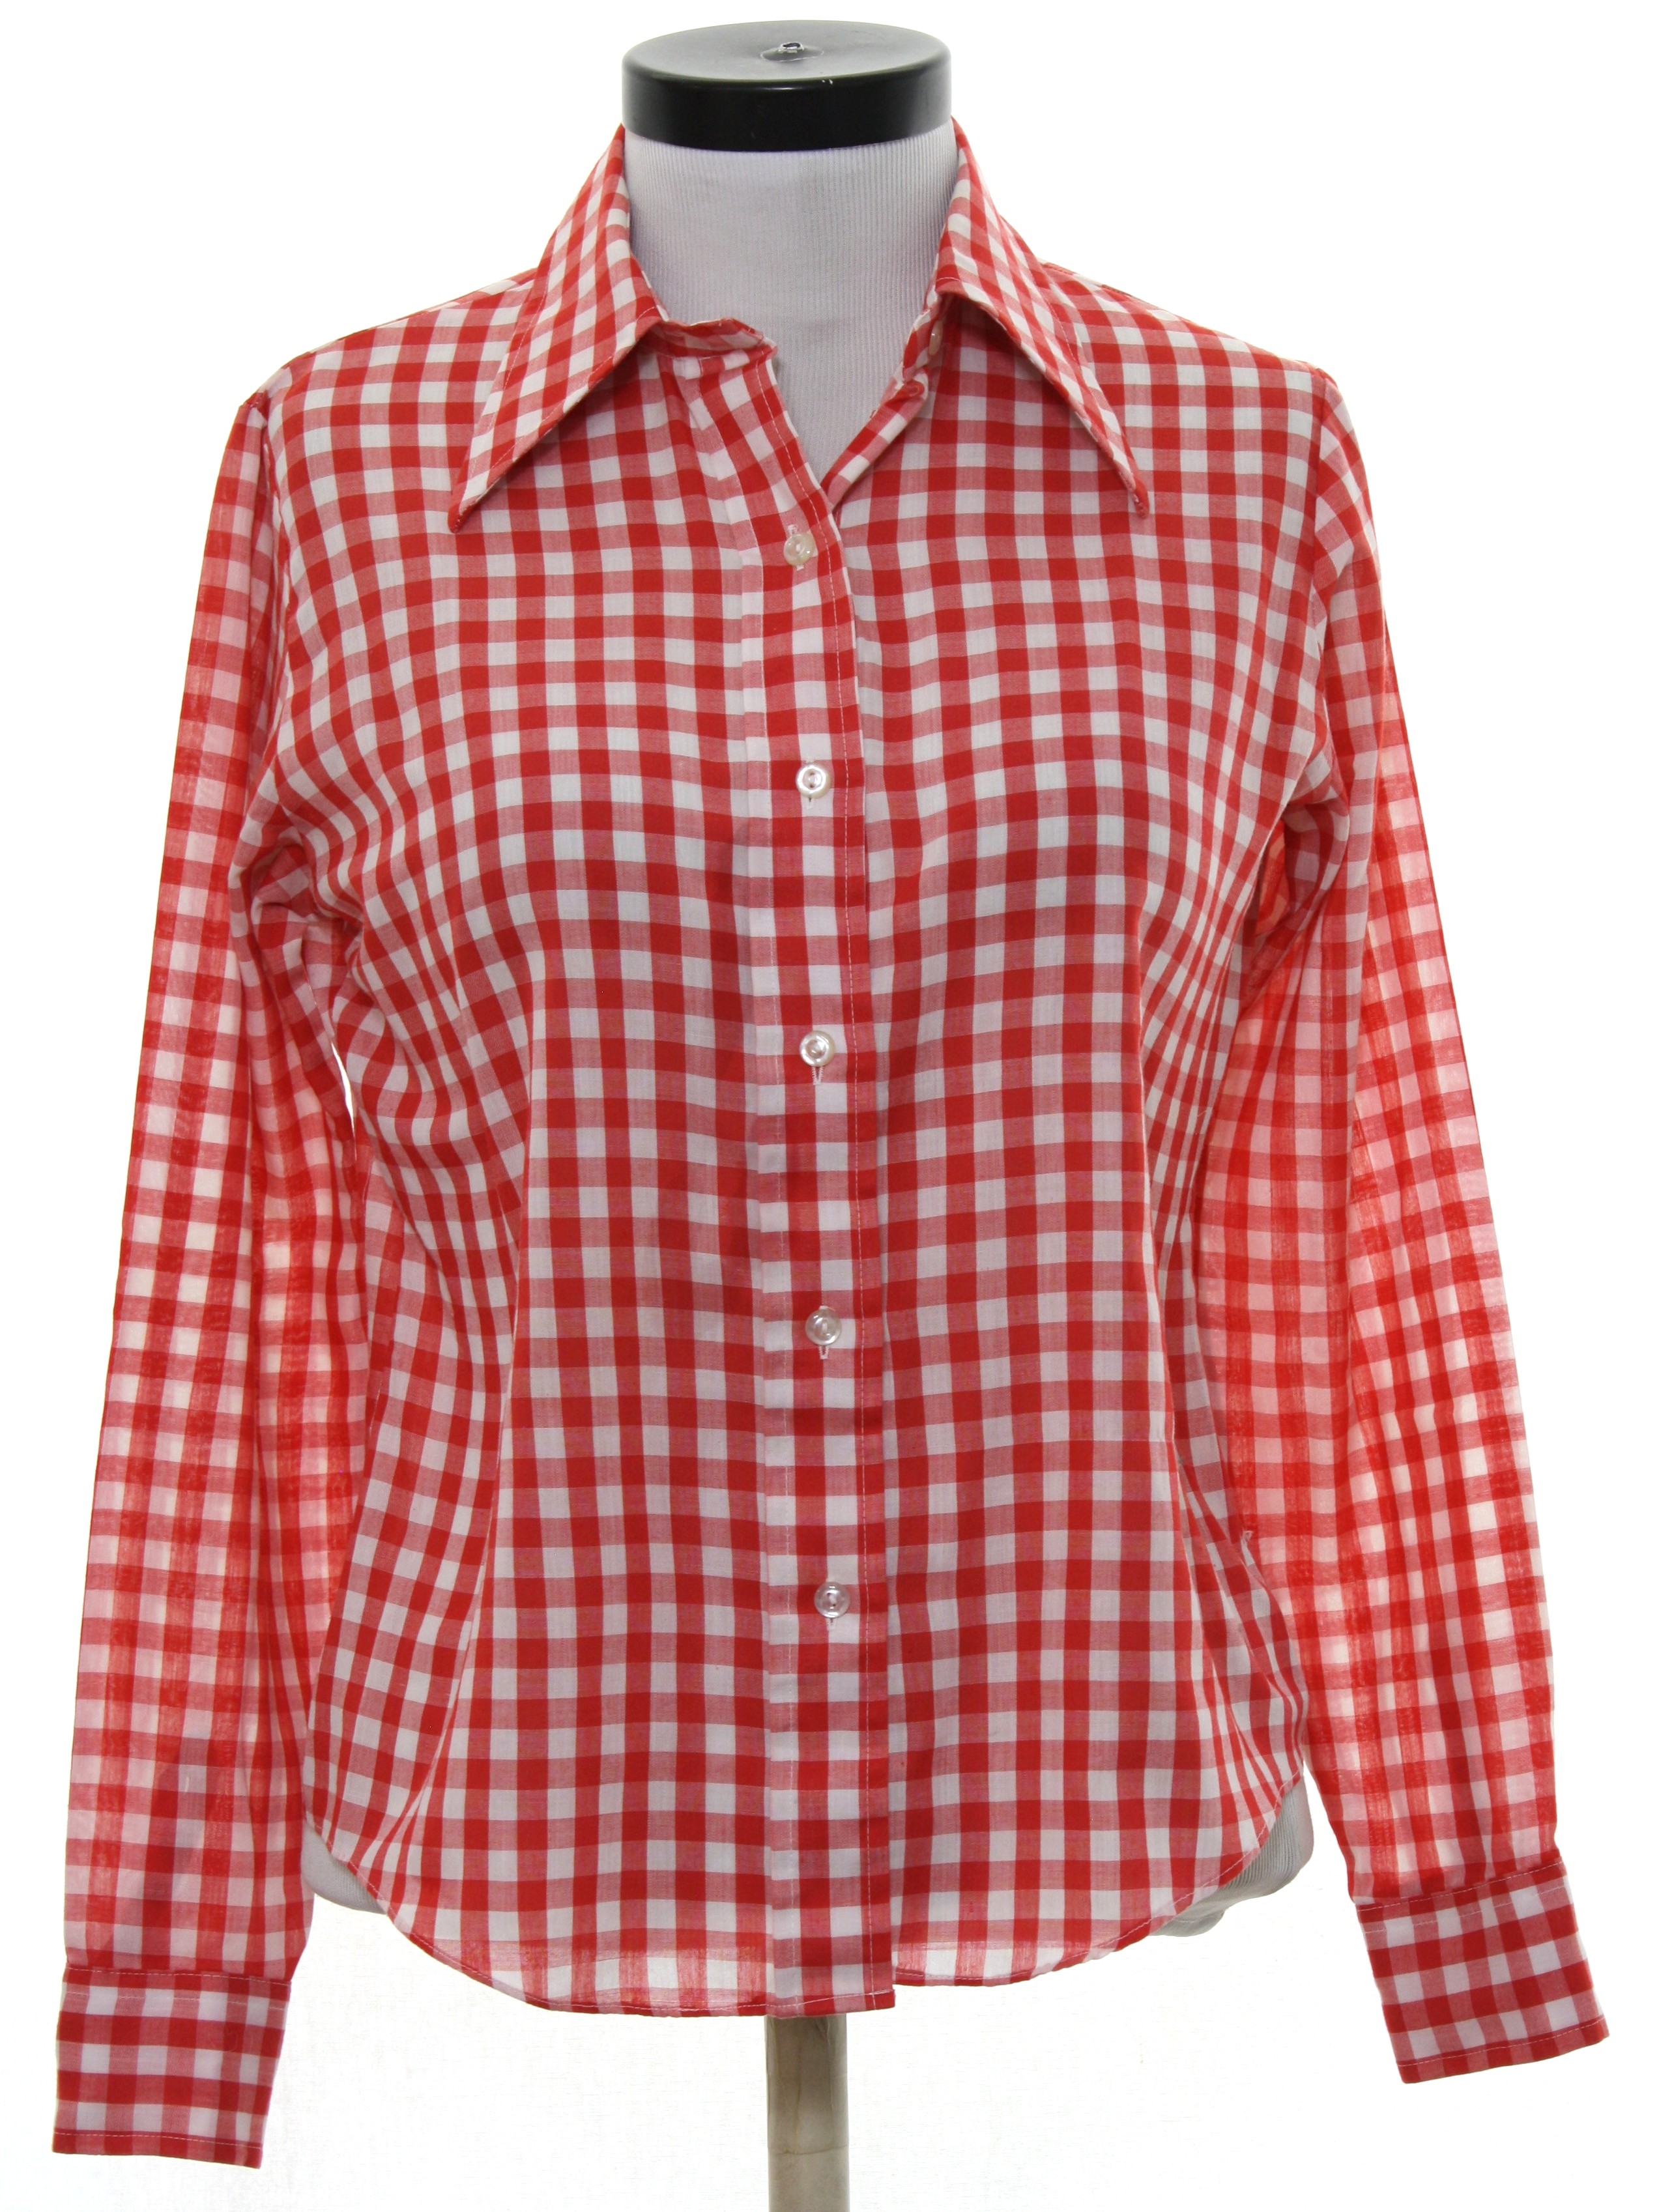 Seventies Vintage Shirt: 70s -Care Label- Womens red and white plaid ...